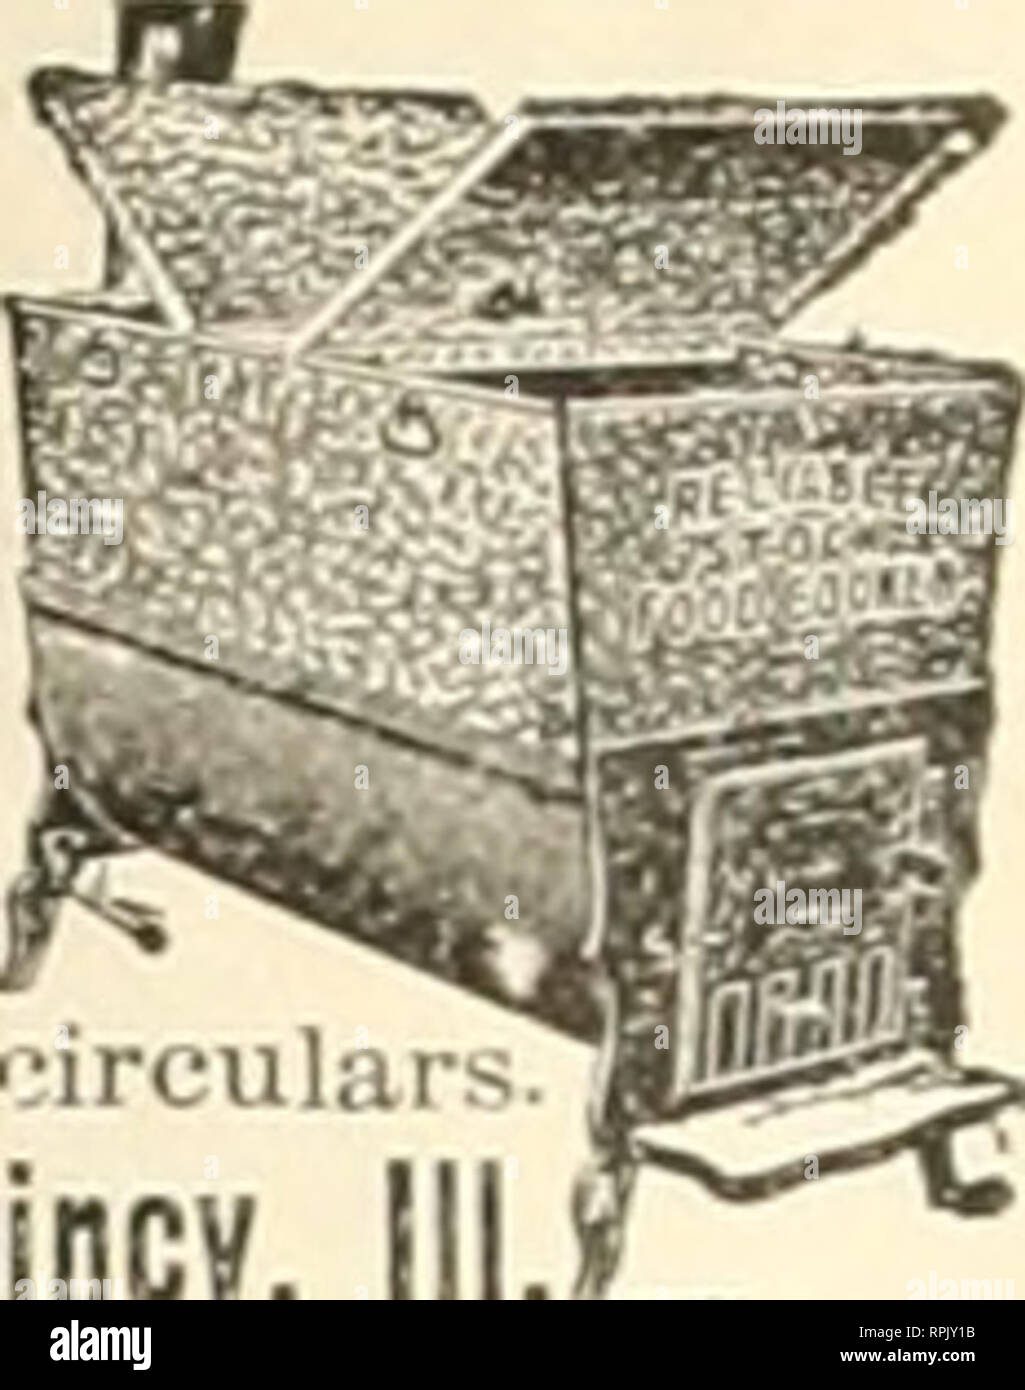 . American bee journal. Bee culture; Bees. 718 AMERICAN BEE JOURNAL Nov. 9, 1899. IiH; OlilR^LIABLE FEED COOKERS ^ly^ vB « V V V &gt; i&quot;^P&gt;'&quot;?sent unequaled value in this class of live st'^^ 1: ^^^ V^^ H ^^ X^ V appliances. Best cast iron furnace witli larere hcarnu FOR A GOOD FEED COOKER [ surface. Boilers ma-le of best No. 22 galvanized si -can't rust, tarnish or poison and discolor food. C 20 gal. size $5. 50 gal. size S12. and limgal. size Si6. ^ The small size bums wood onlj-; the larger sizes burn ( both wood or coaL Don't buy until you get our free circular; [ Reliable Incu Stock Photo